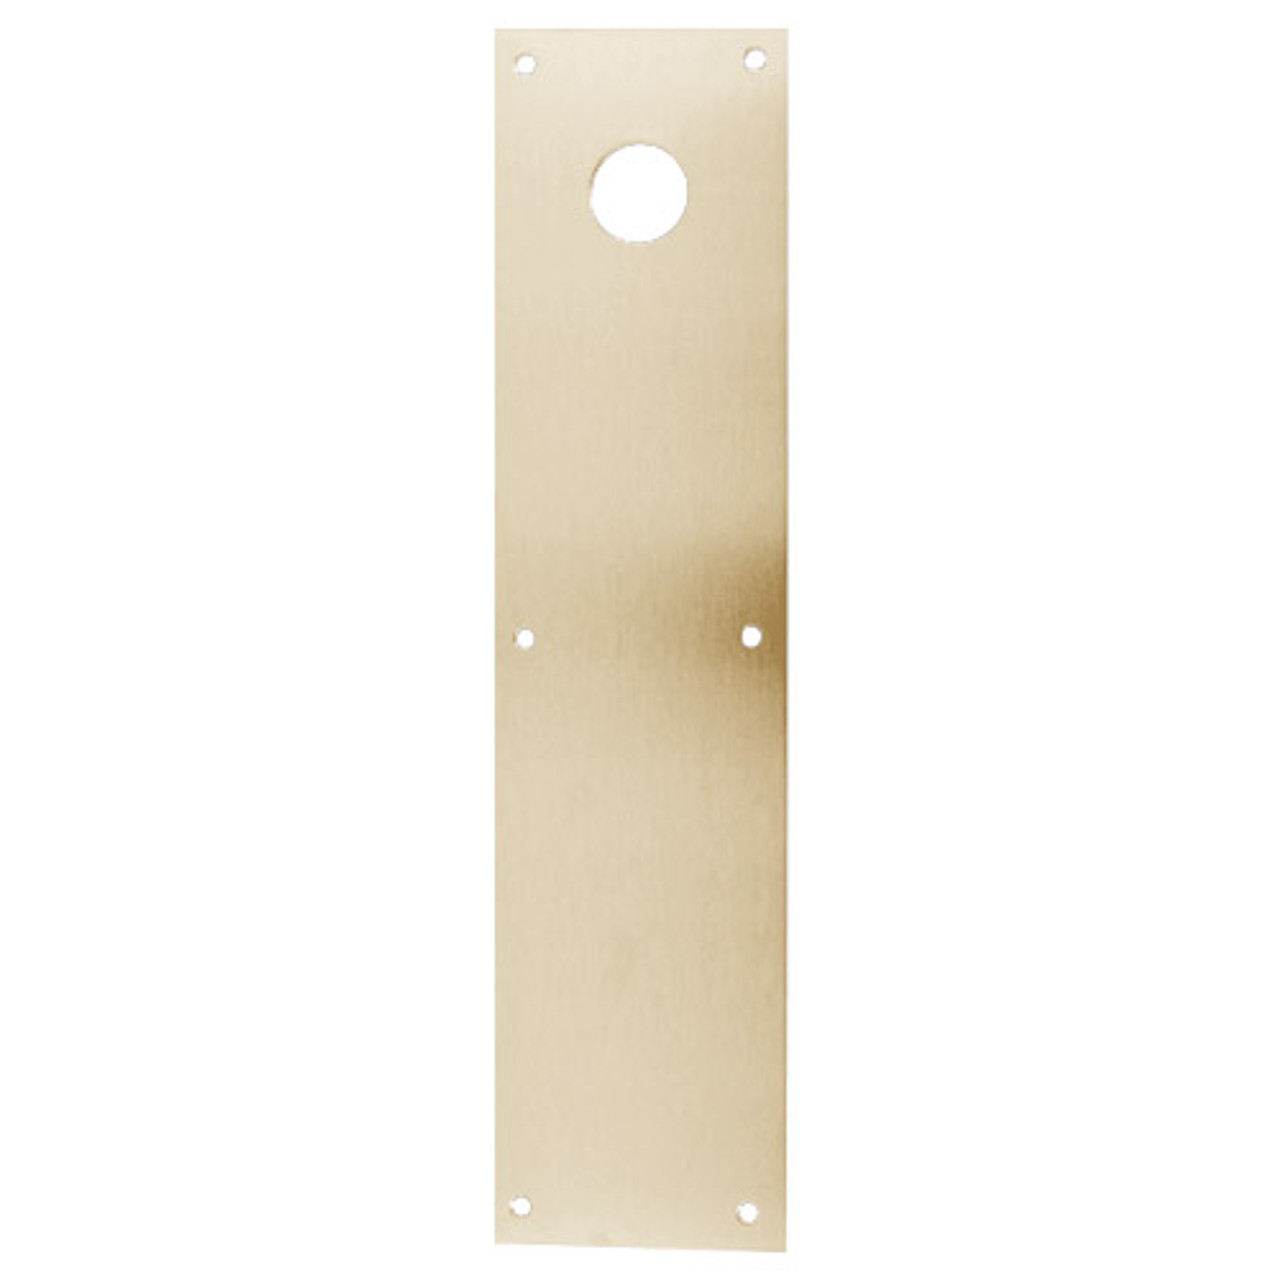 CFC71-606 Don Jo Push Plates with Holes in Clear Satin Brass Finish